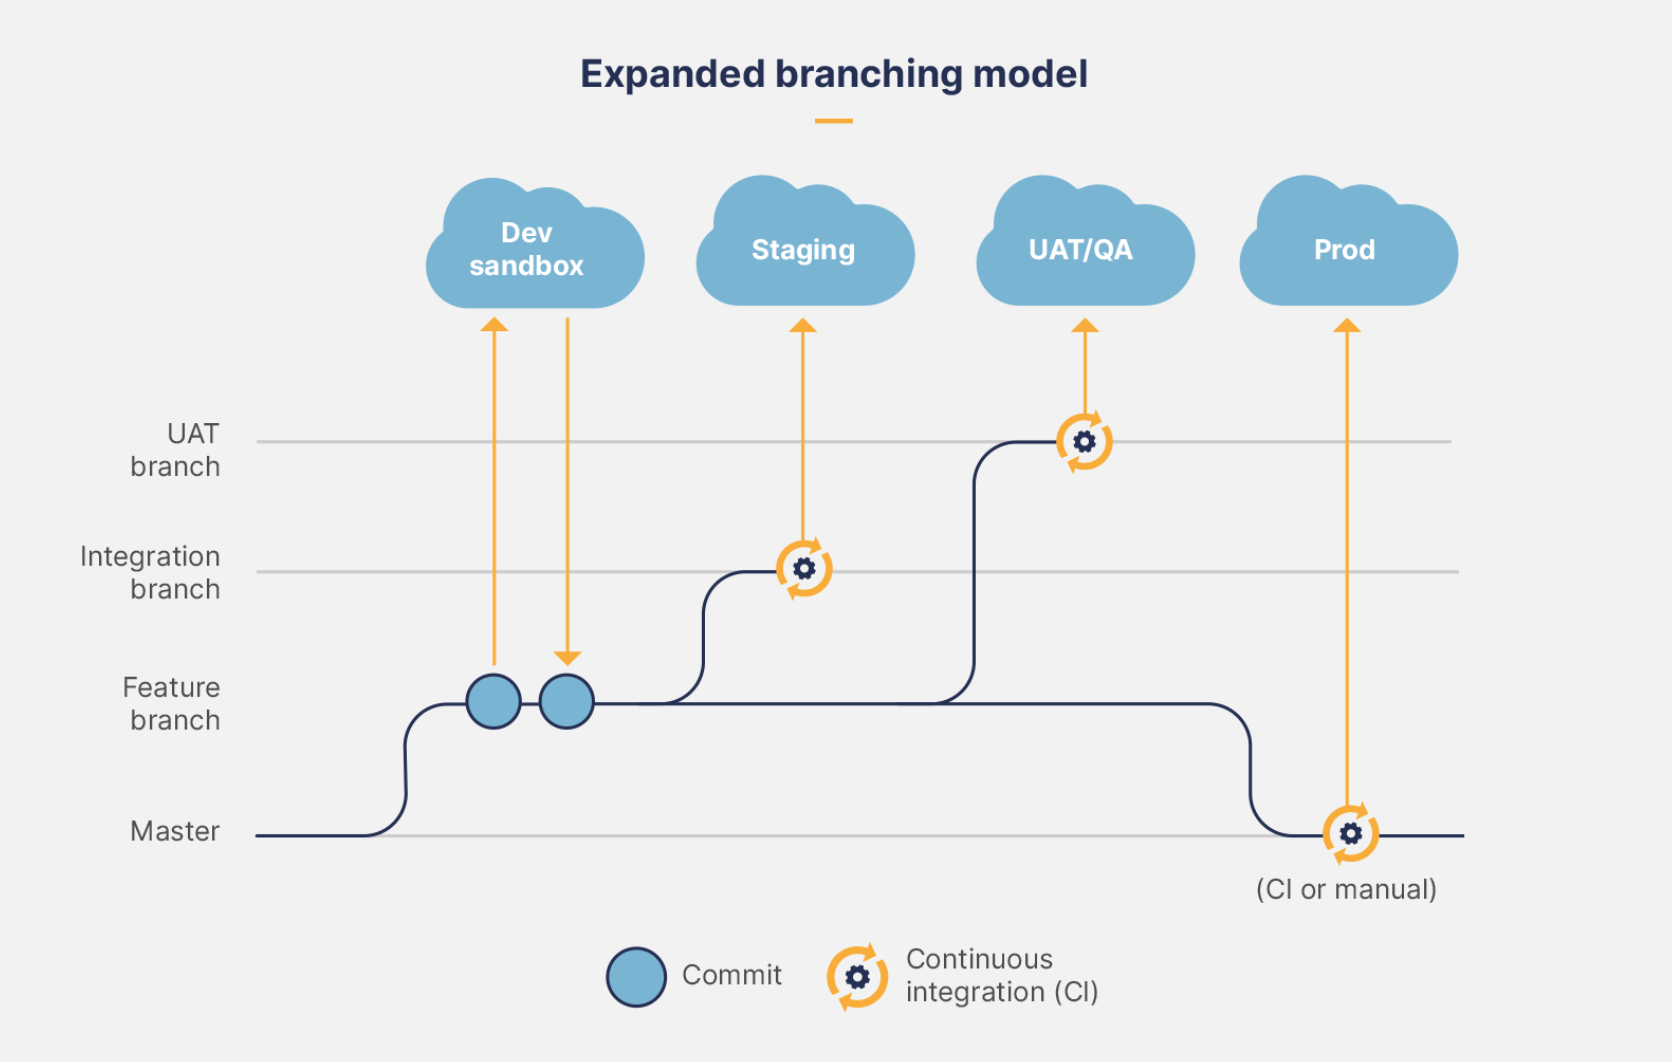 Expanded branching model